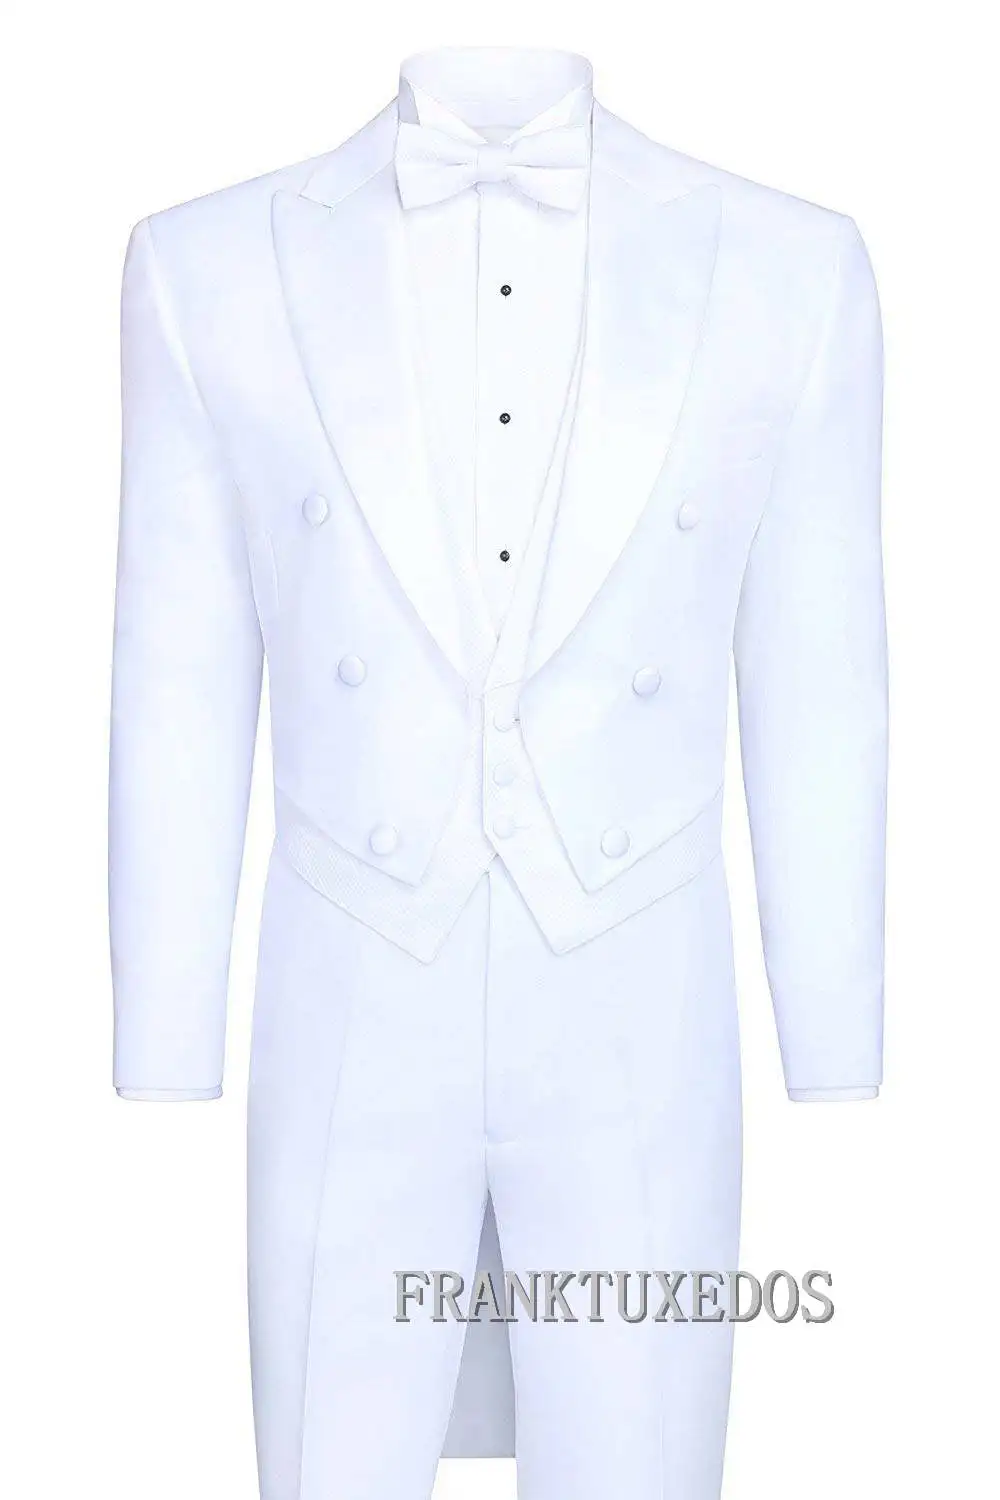 Custom Made To Measure White Evening Tailcoats With Wide Notch Lapel,Bespoke Wedding Tailcoat Suit,Tailored Groom Long Tail Suit